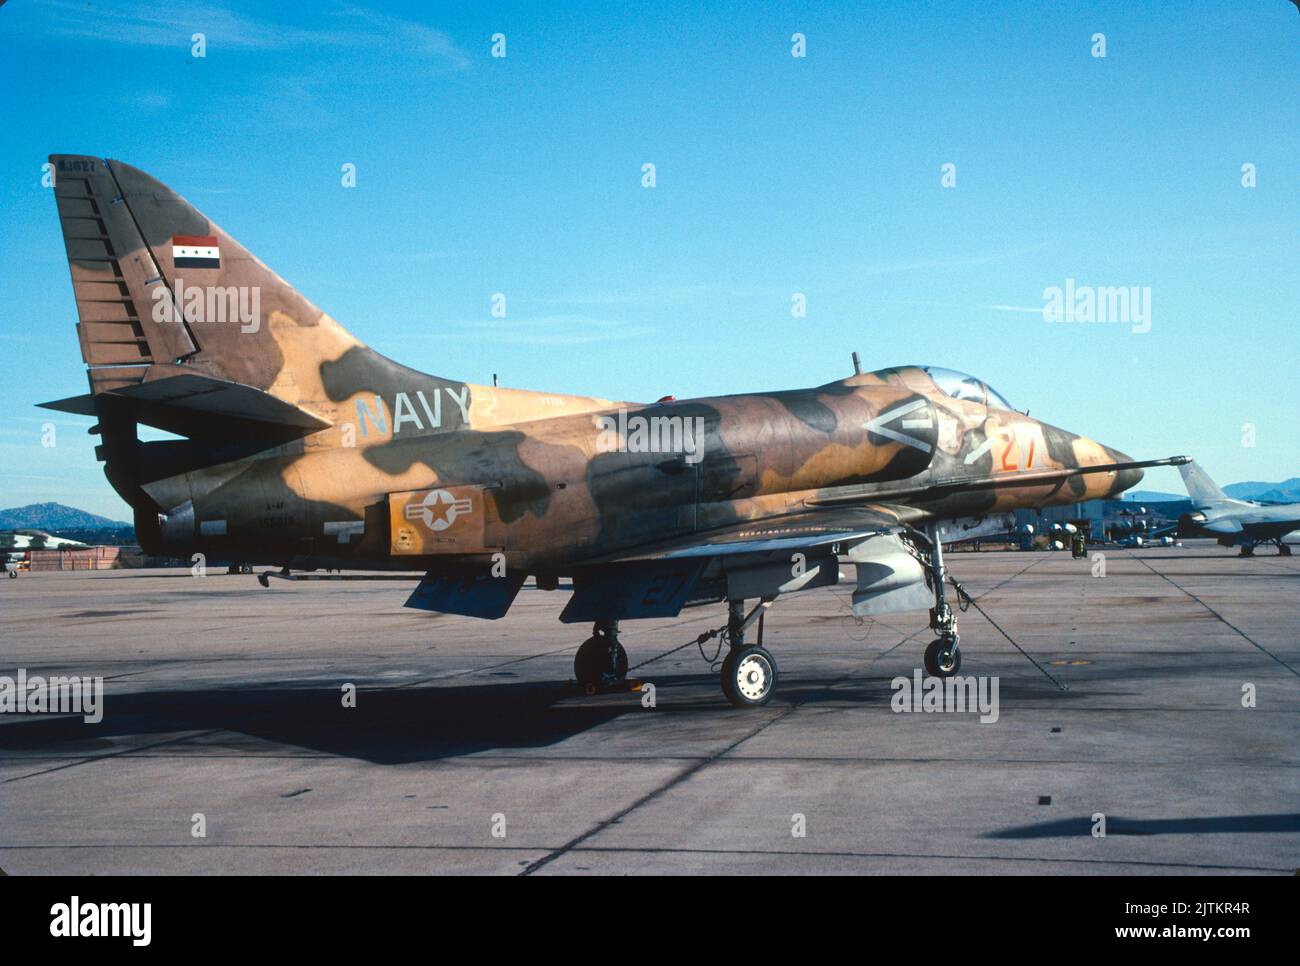 Douglas A-4 Skyhawk aggressor aircraft used by instructors at the Navy Fighter Weapons School, AKA Top Gun, aboard NAS Miramar in San Diego, Californi Stock Photo